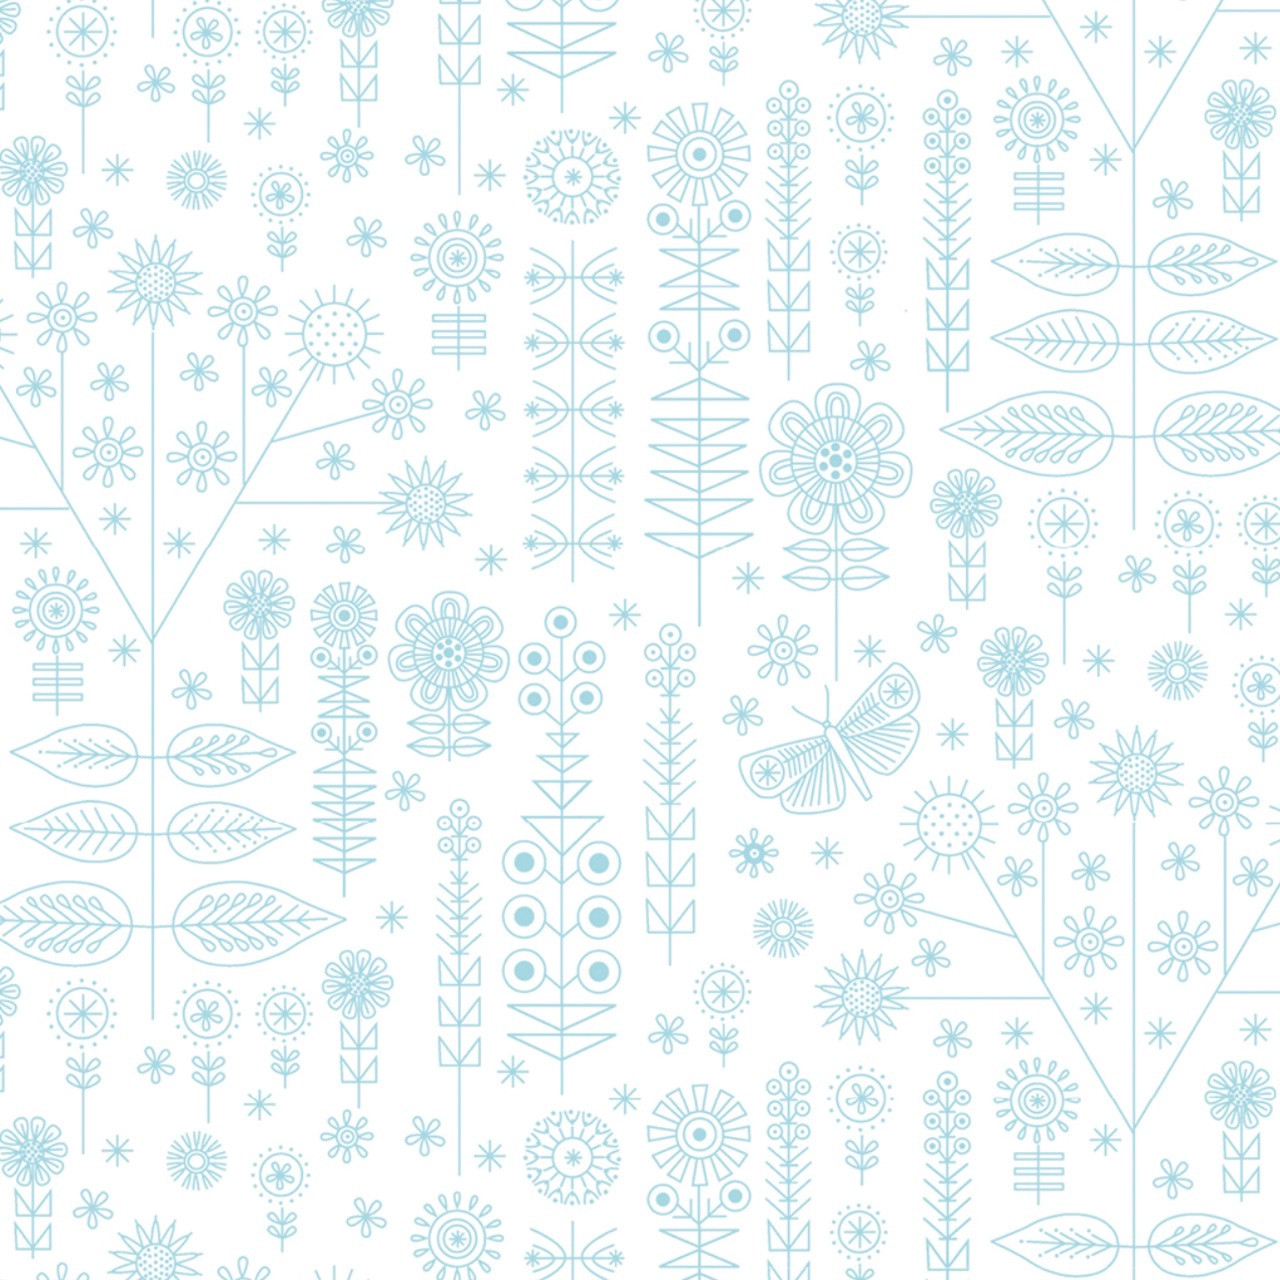 White 100% cotton fabric with blue botanical sketch patterns from Clothworks' Summer Sampler collection by Nancy Nicholson.